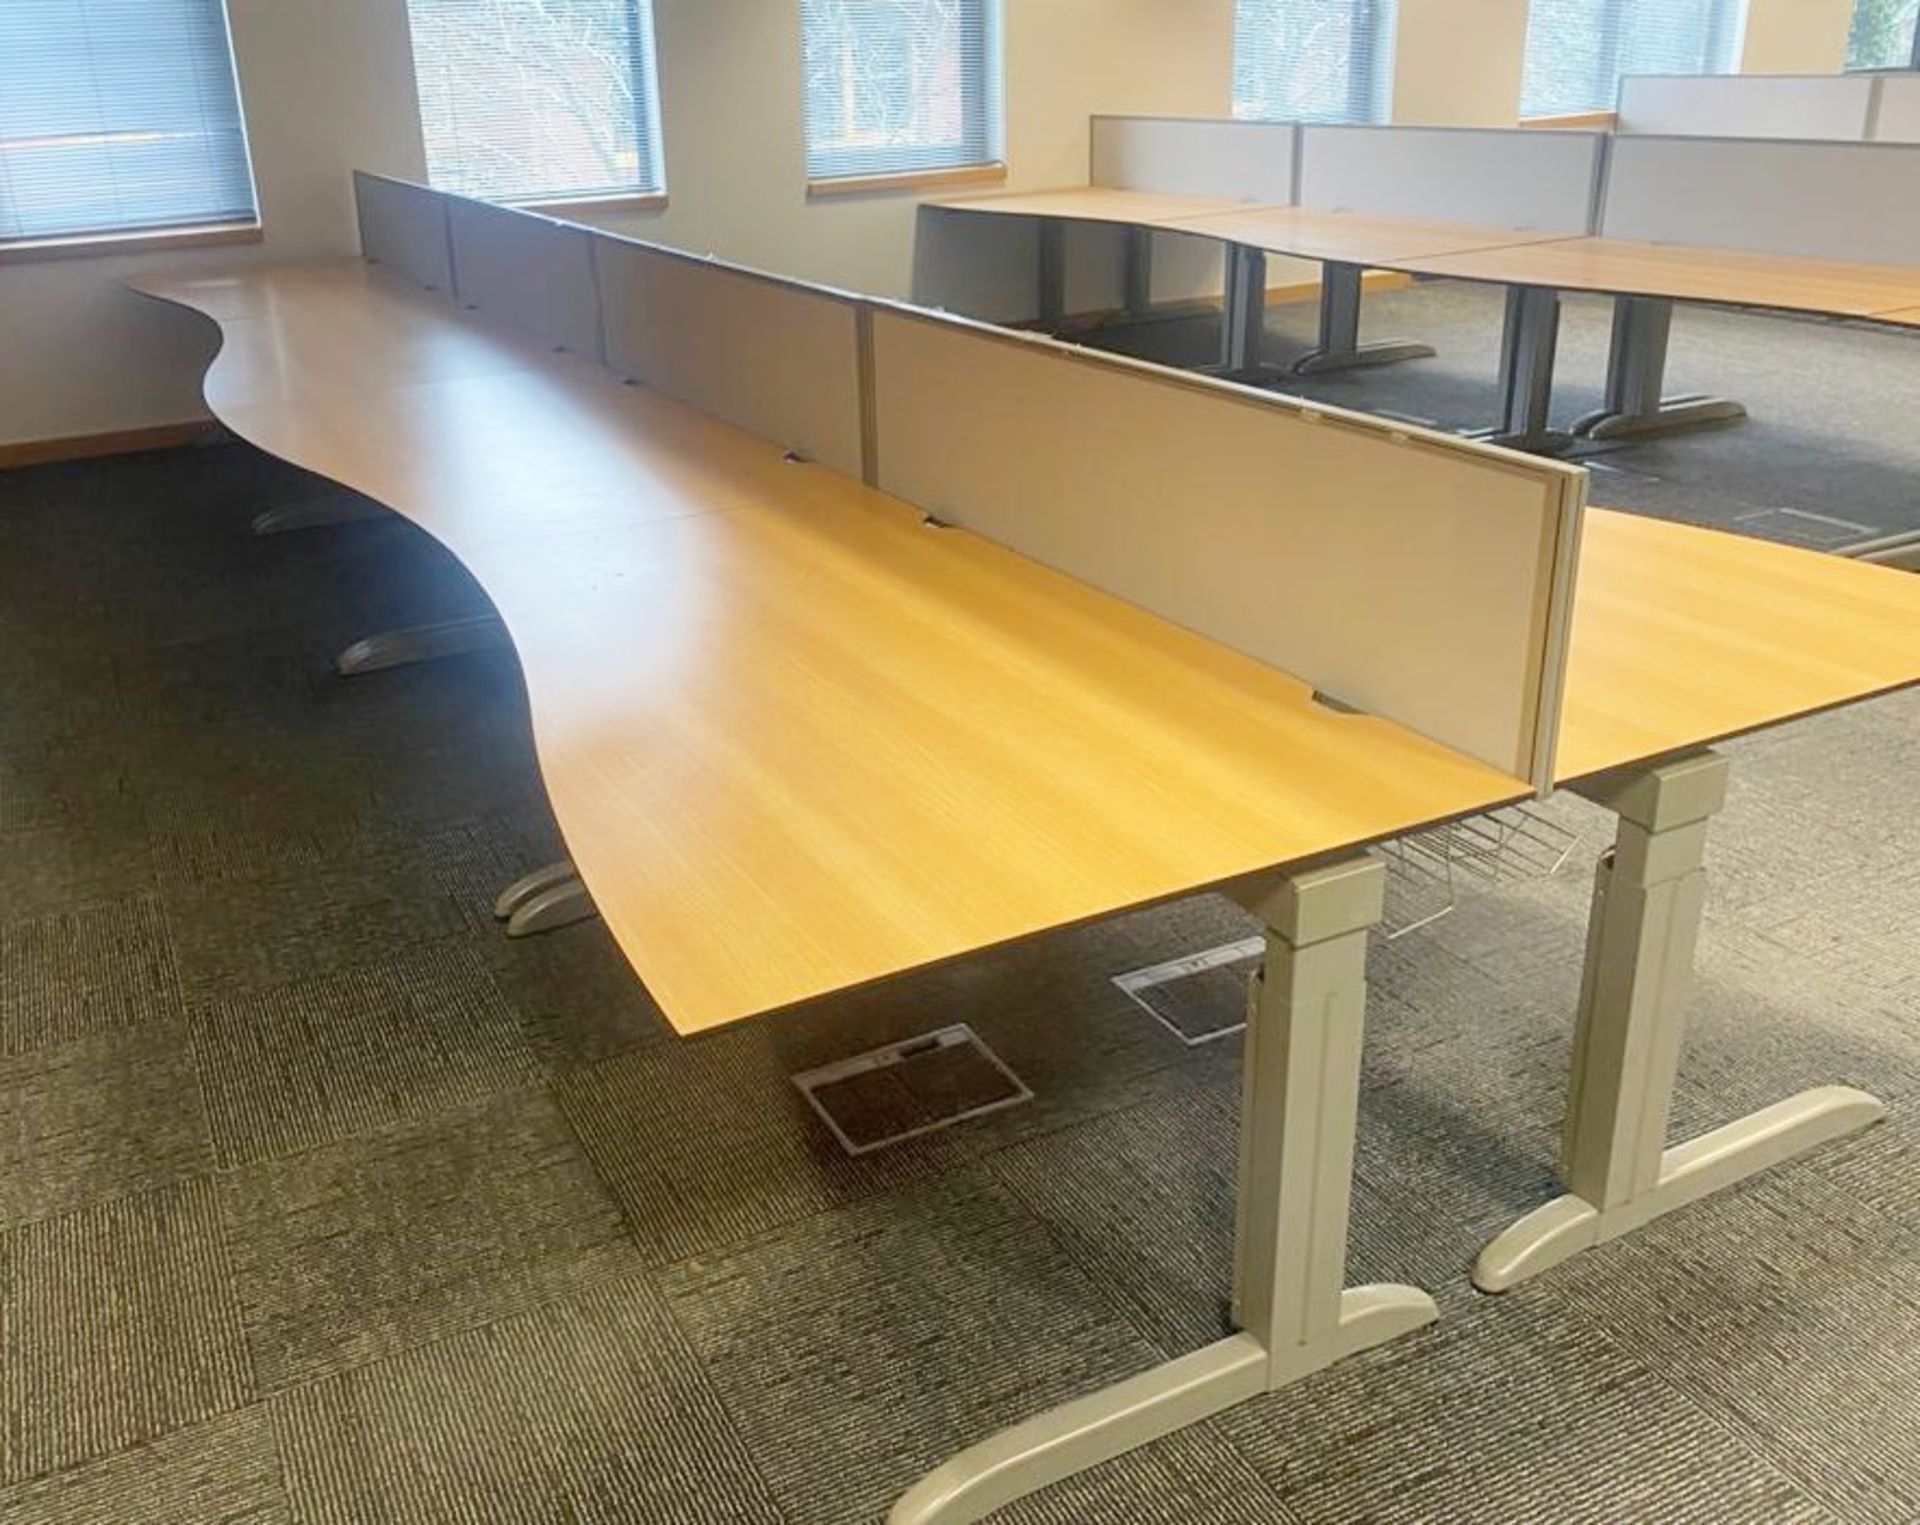 8 x Techo Wave Office Desks With Privacy Panels and Cable Tidy Cages - Beech Wood Finish - Image 2 of 20